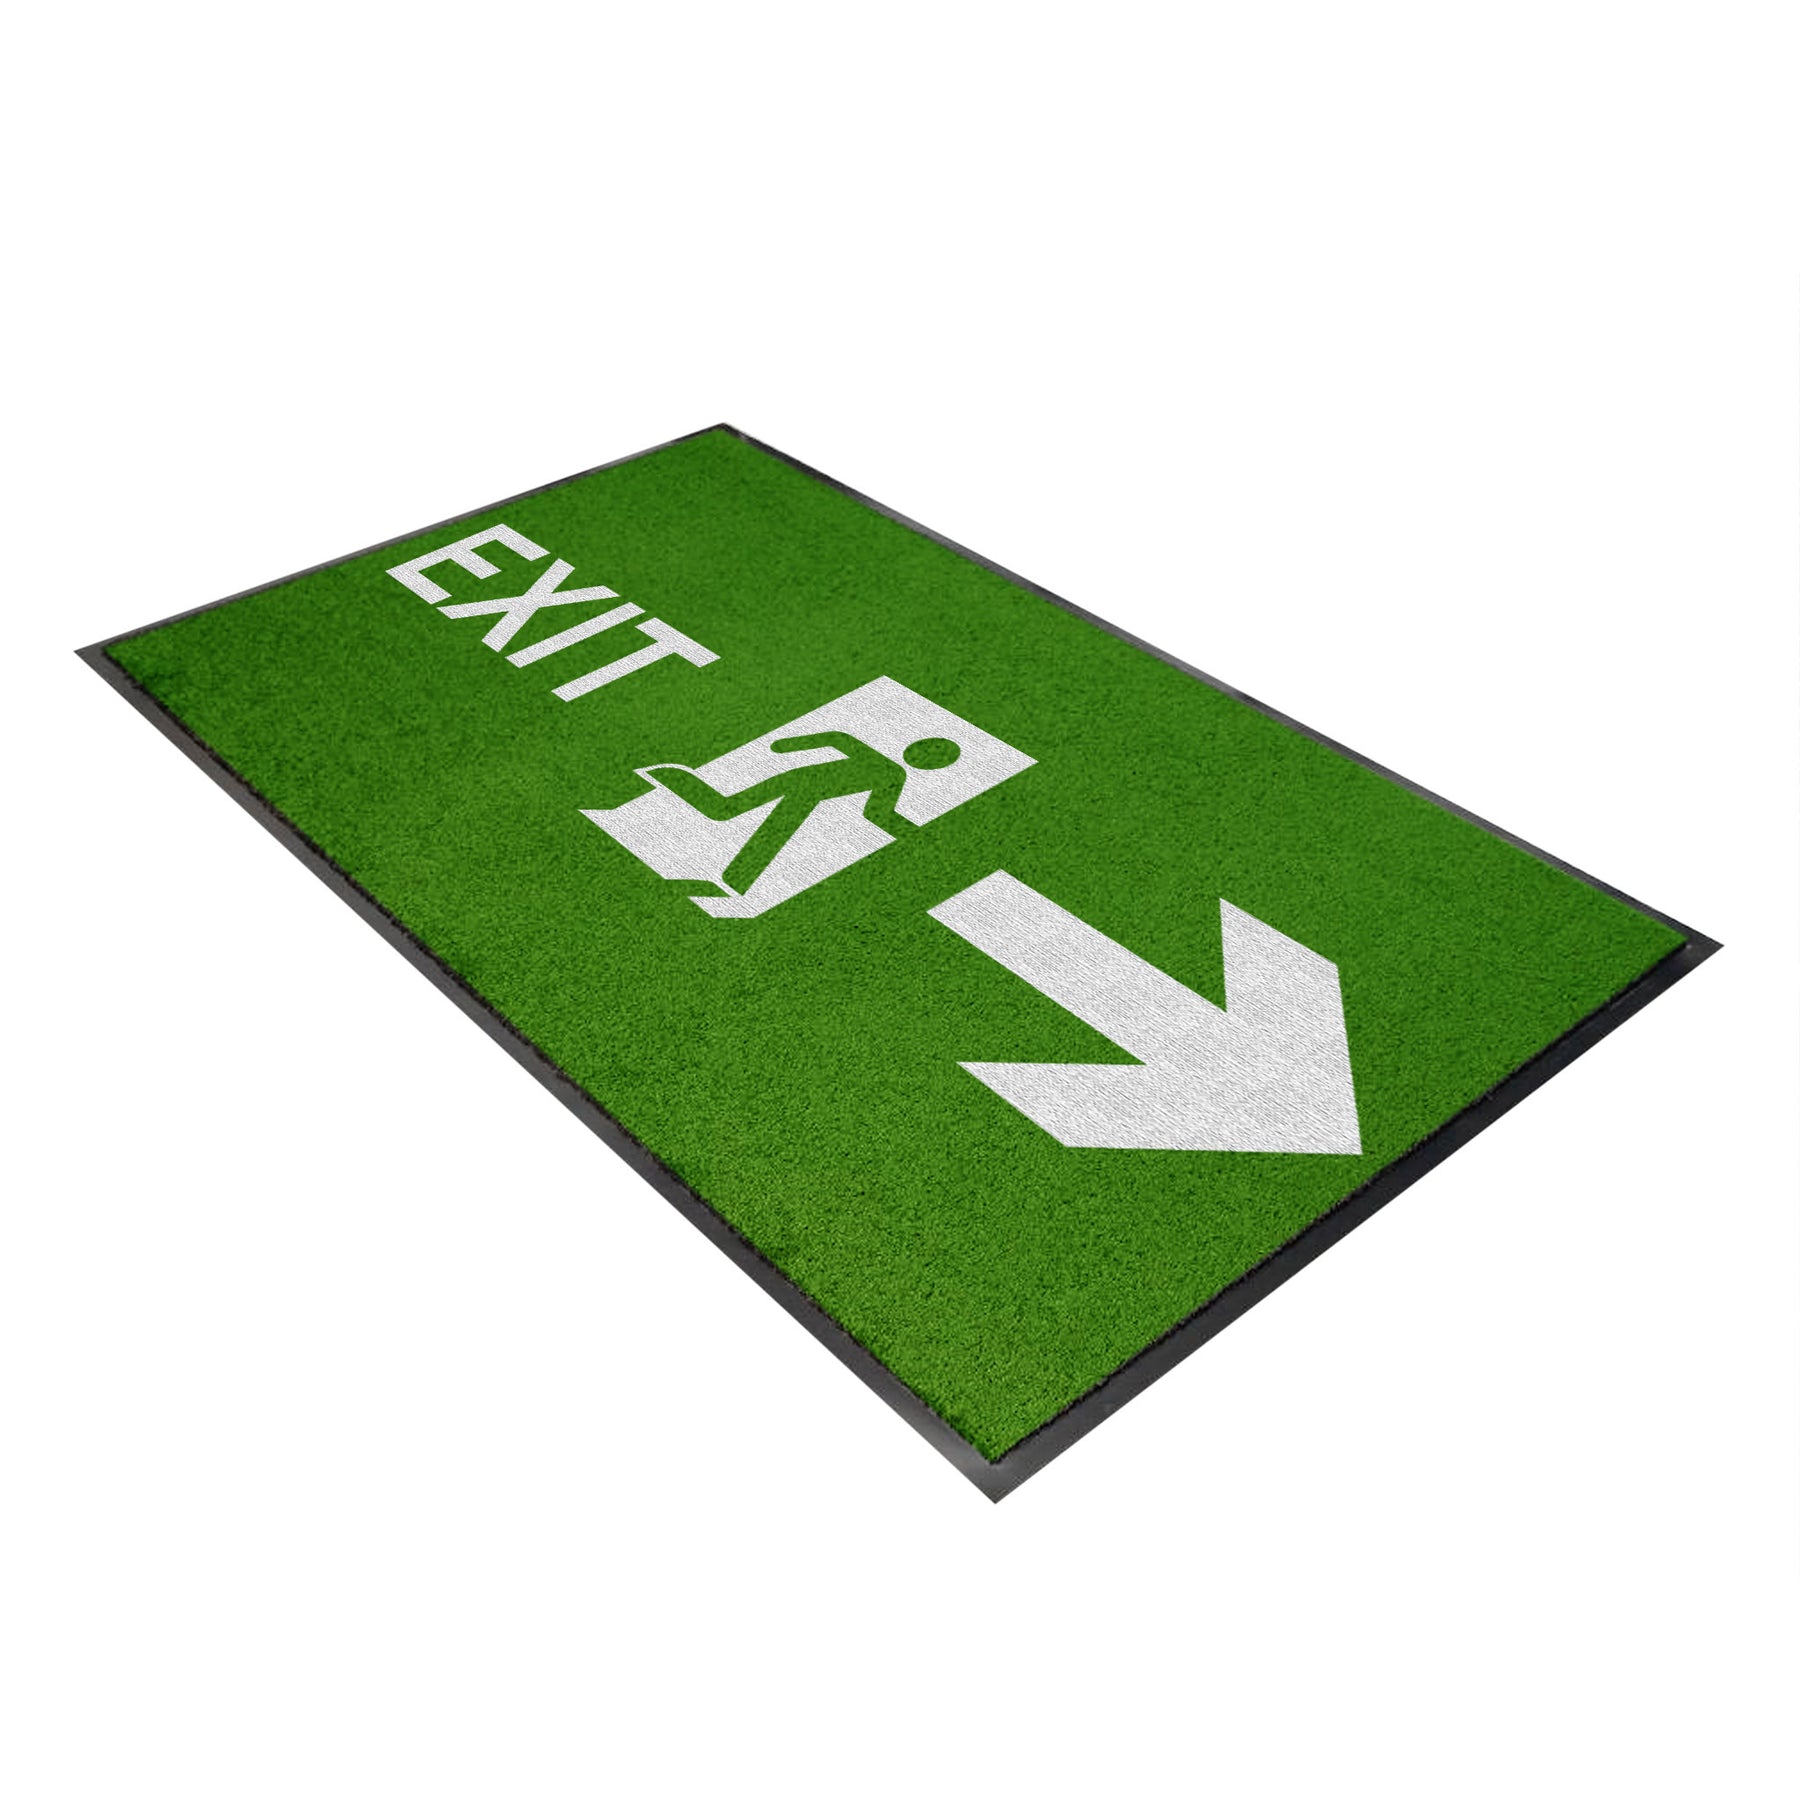 Emergency Exit Safety Mat 850mm x 1200mm